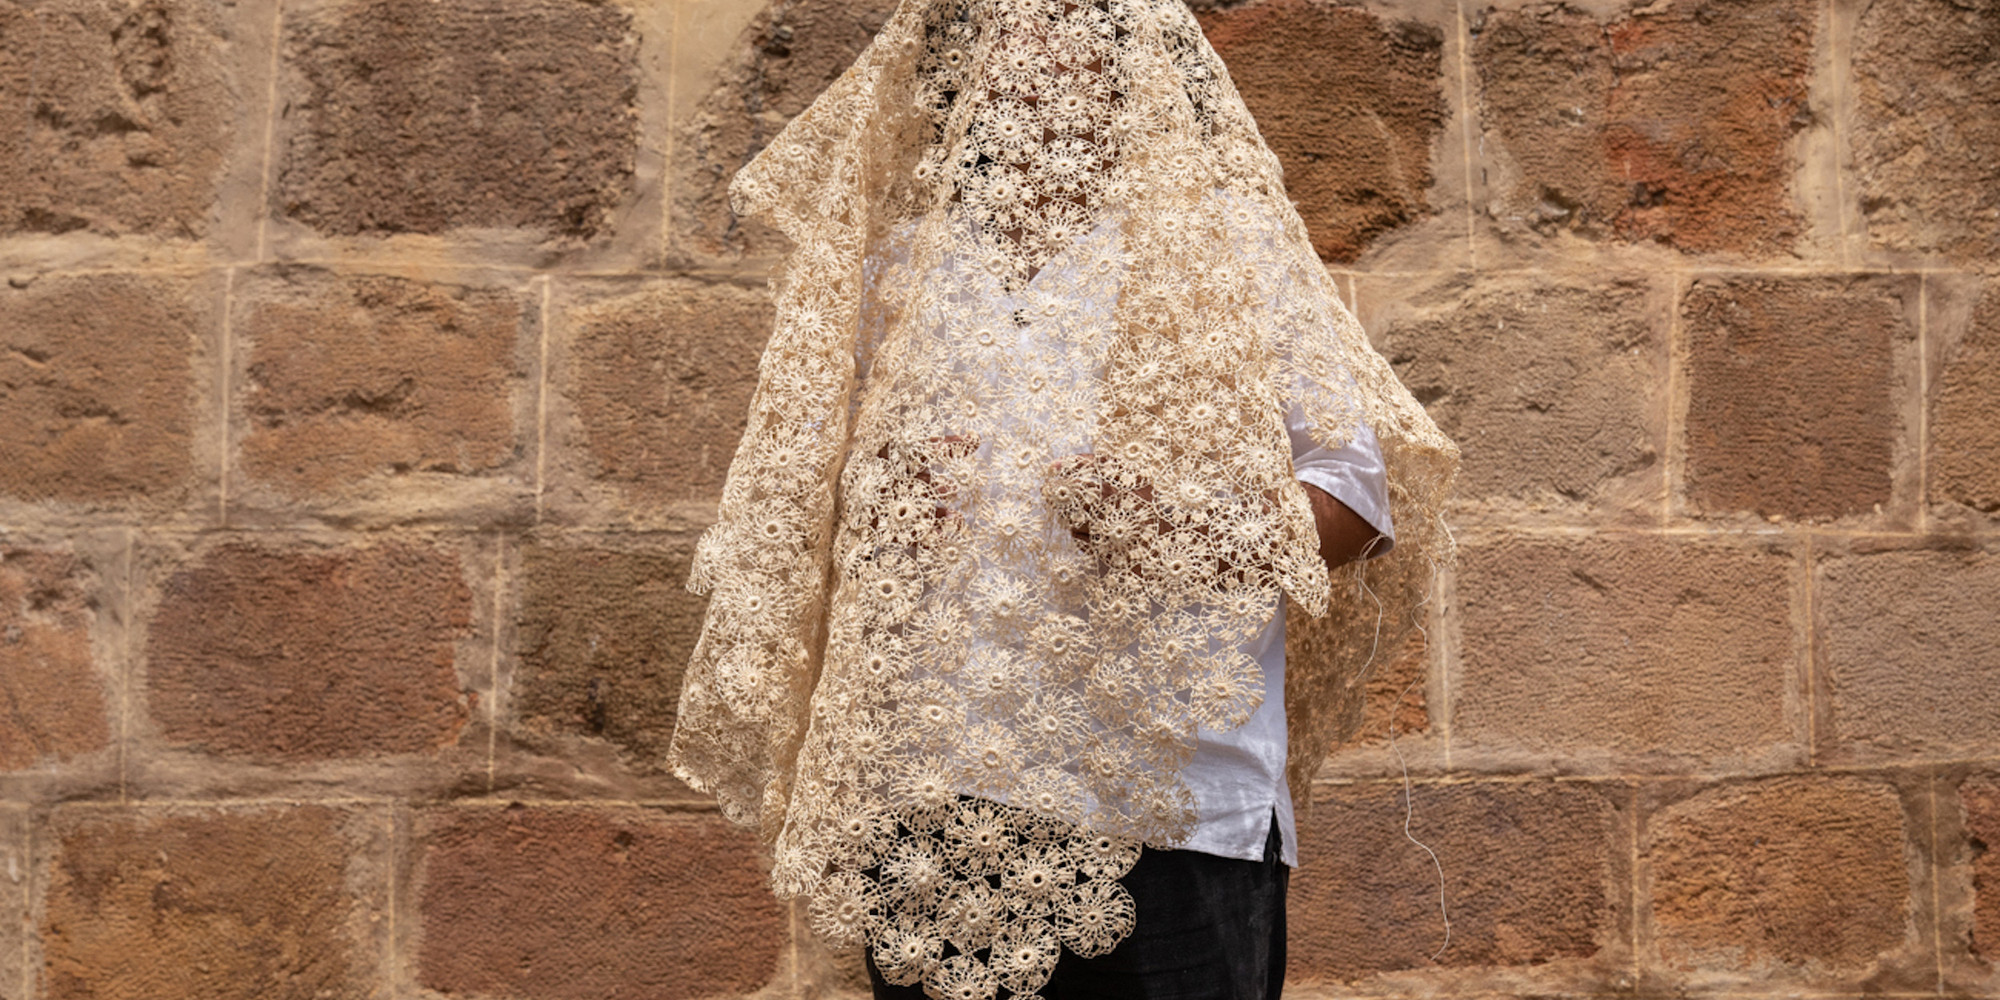 Jorge González wearing a quilt made of Soles-Suaty during the Caminata Suaty in Barichara, Colombia, 2022. Photo: Mateo Pérez. Courtesy of La Reserva Guatoc and the artist